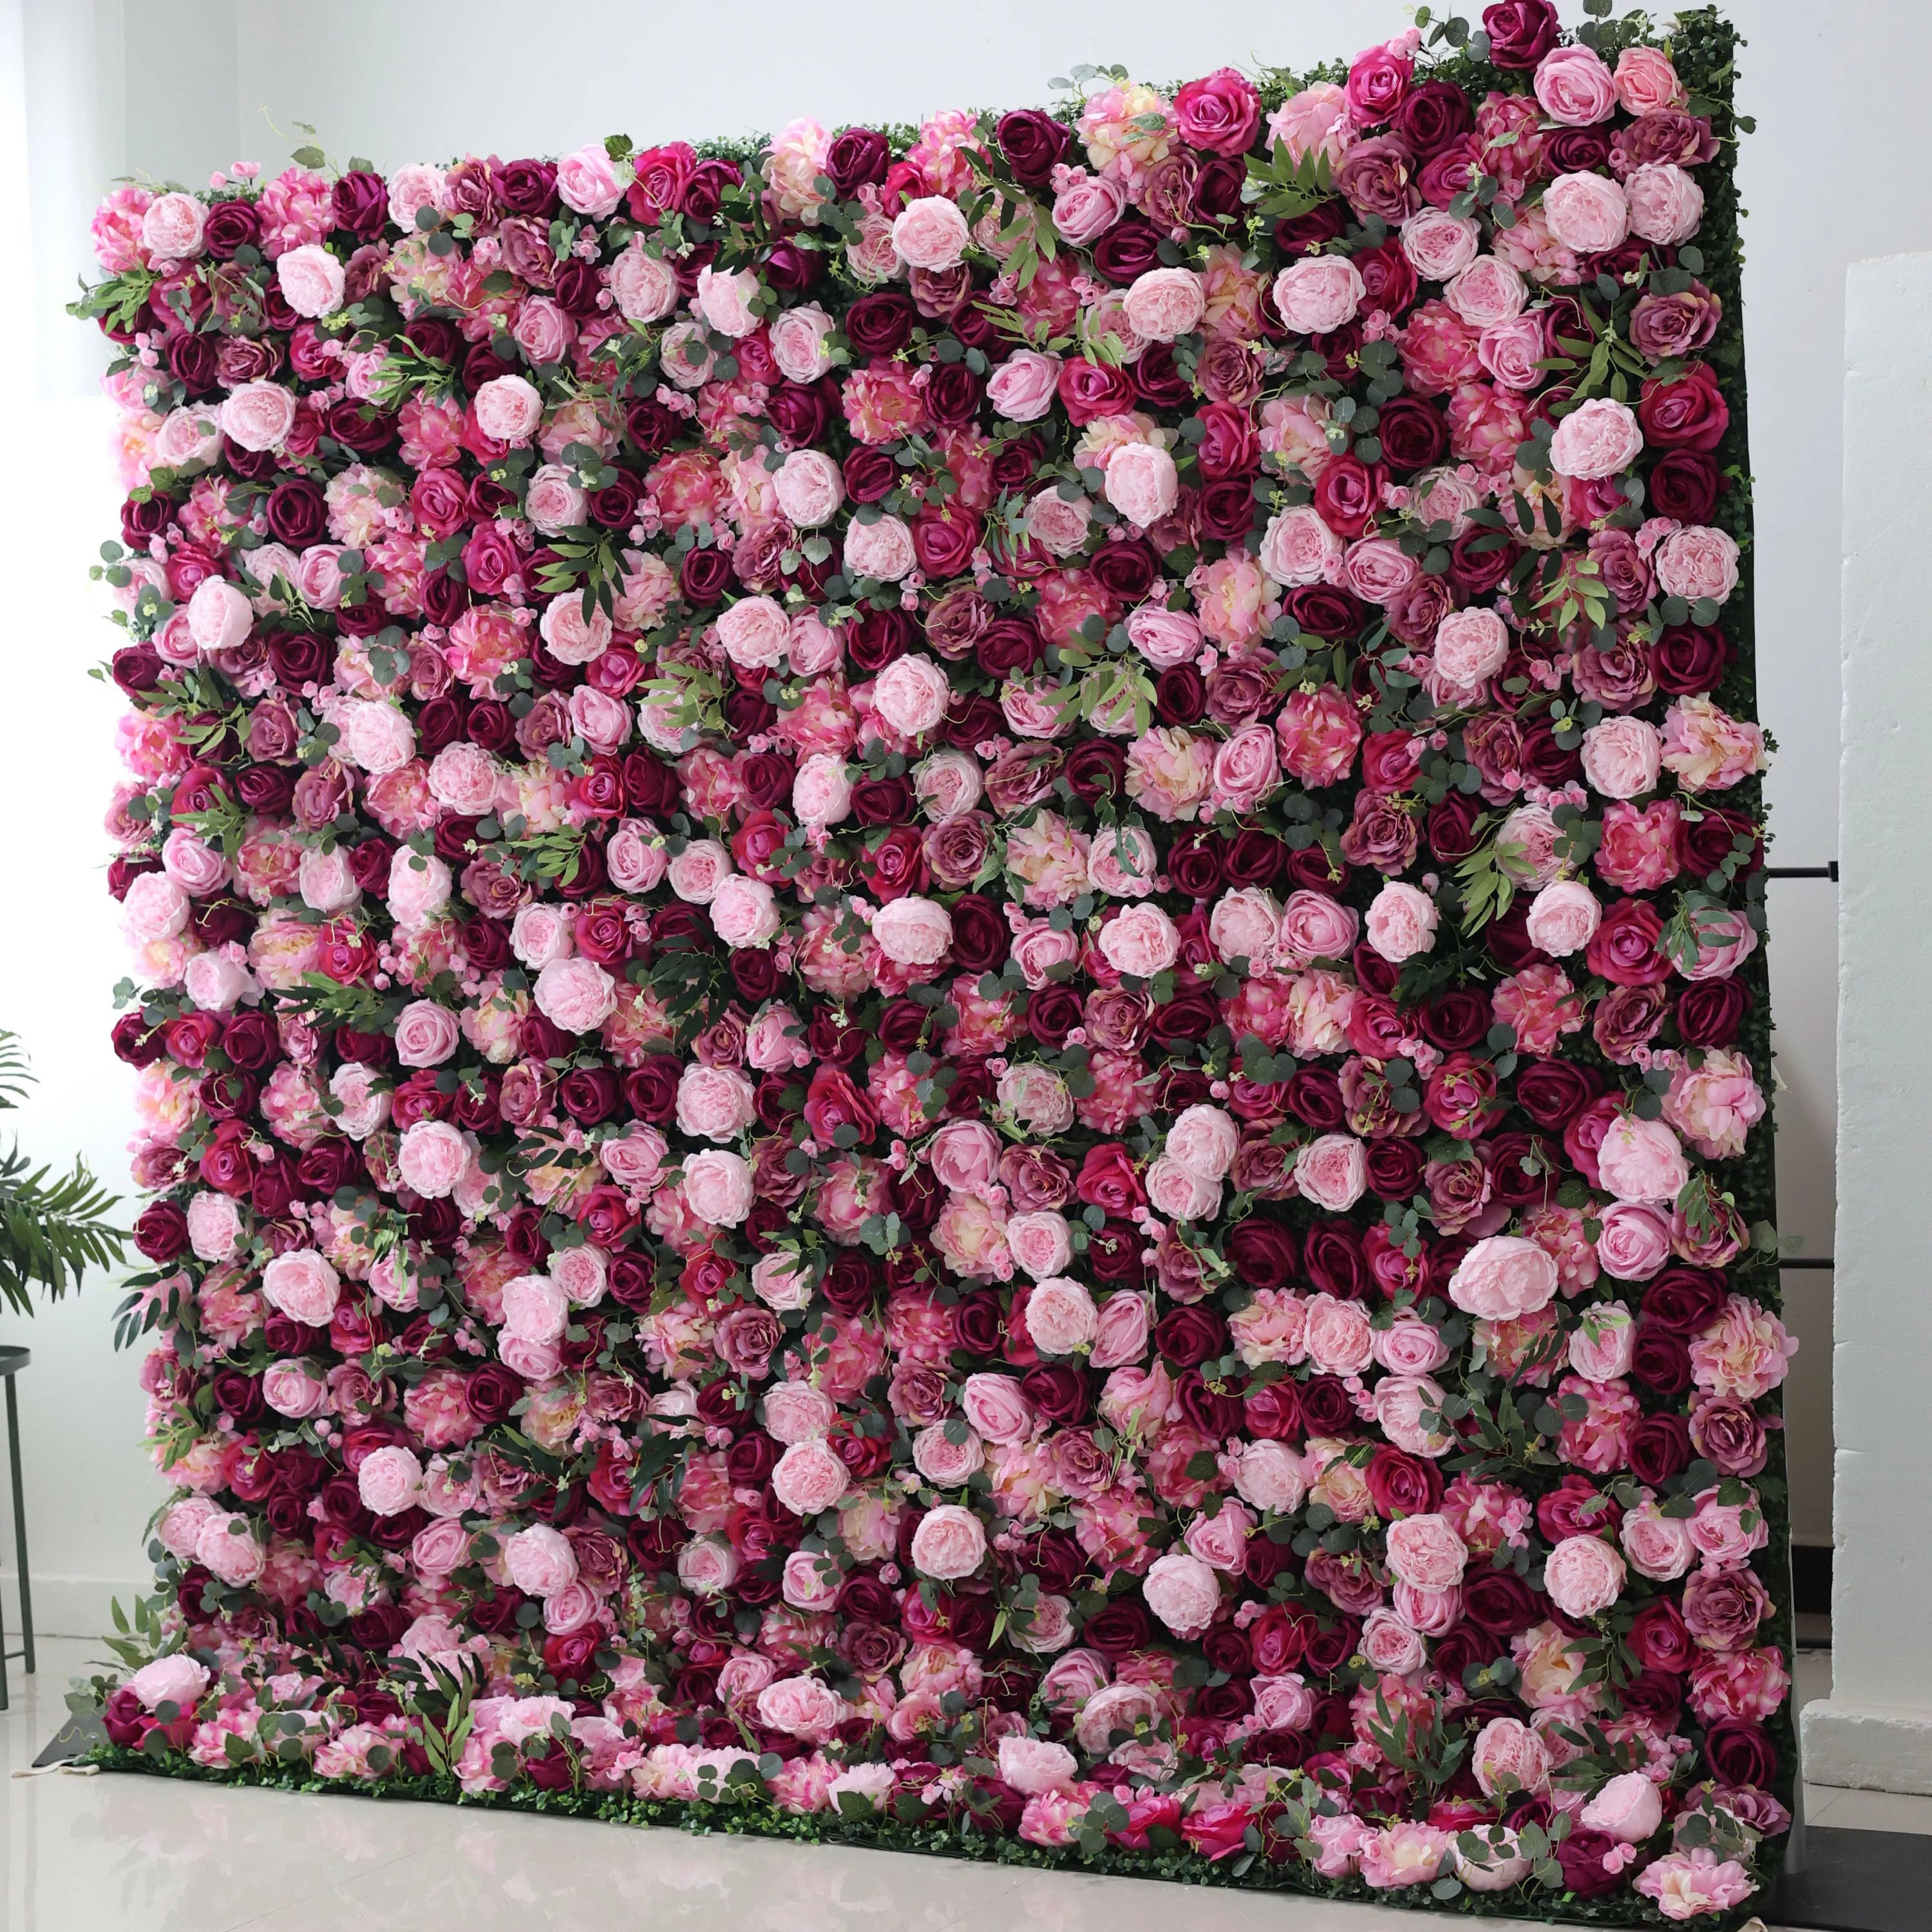 Valar Flowers Roll Up Fabric Artificial Mixed Wine Berry and Wisteria Purple Bouquet Flower Wall Wedding Backdrop, Floral Party Decor, Event Photography-VF-068